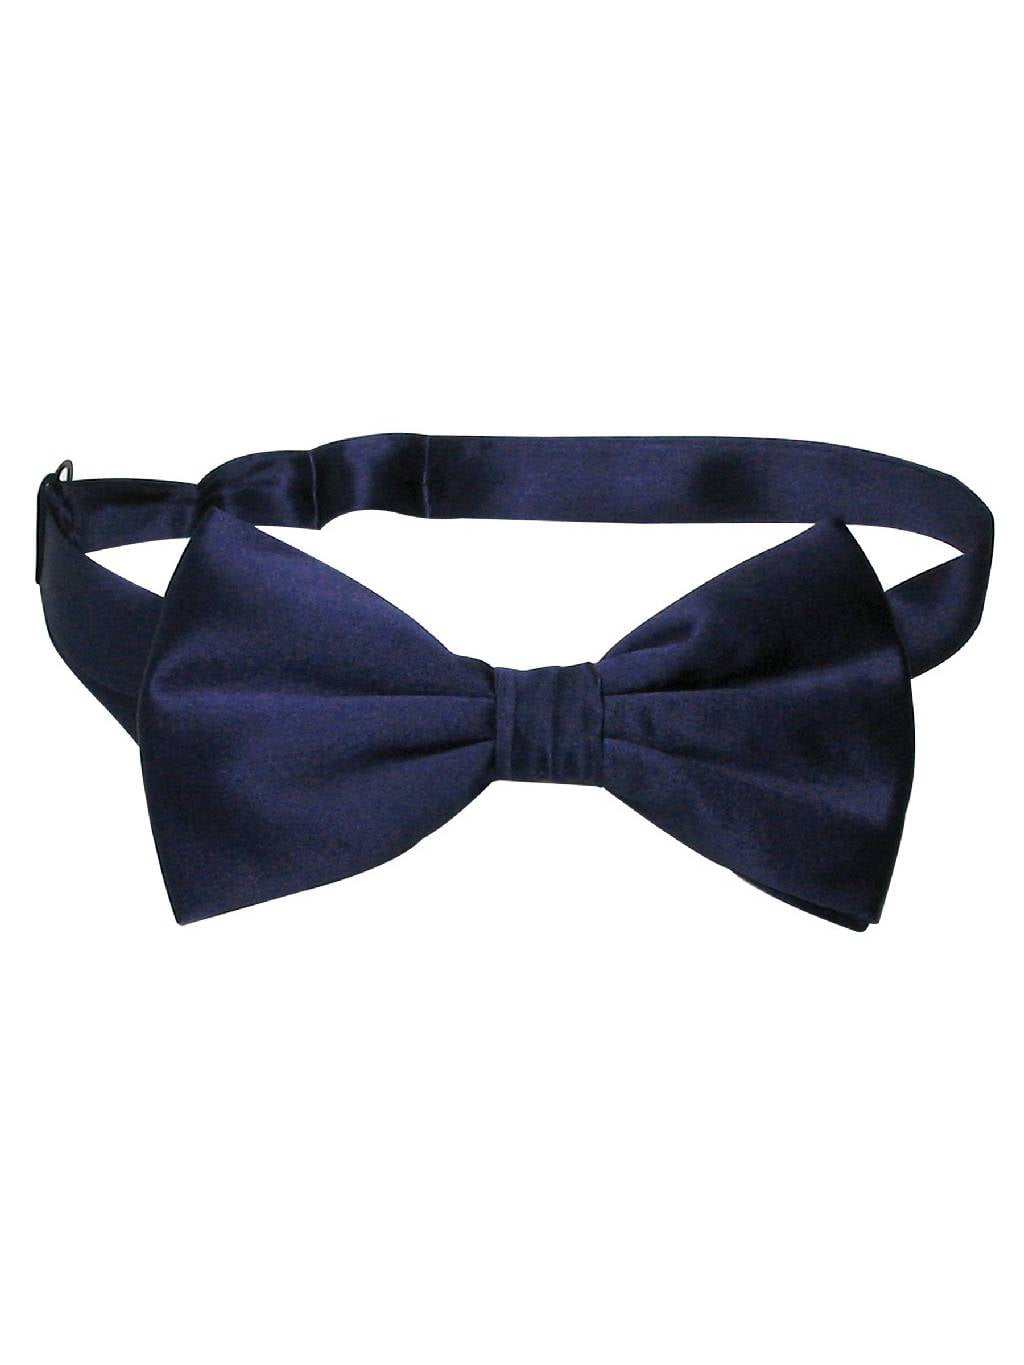 New in box men's self tie free style bow tie solid color 100% silk royal blue 